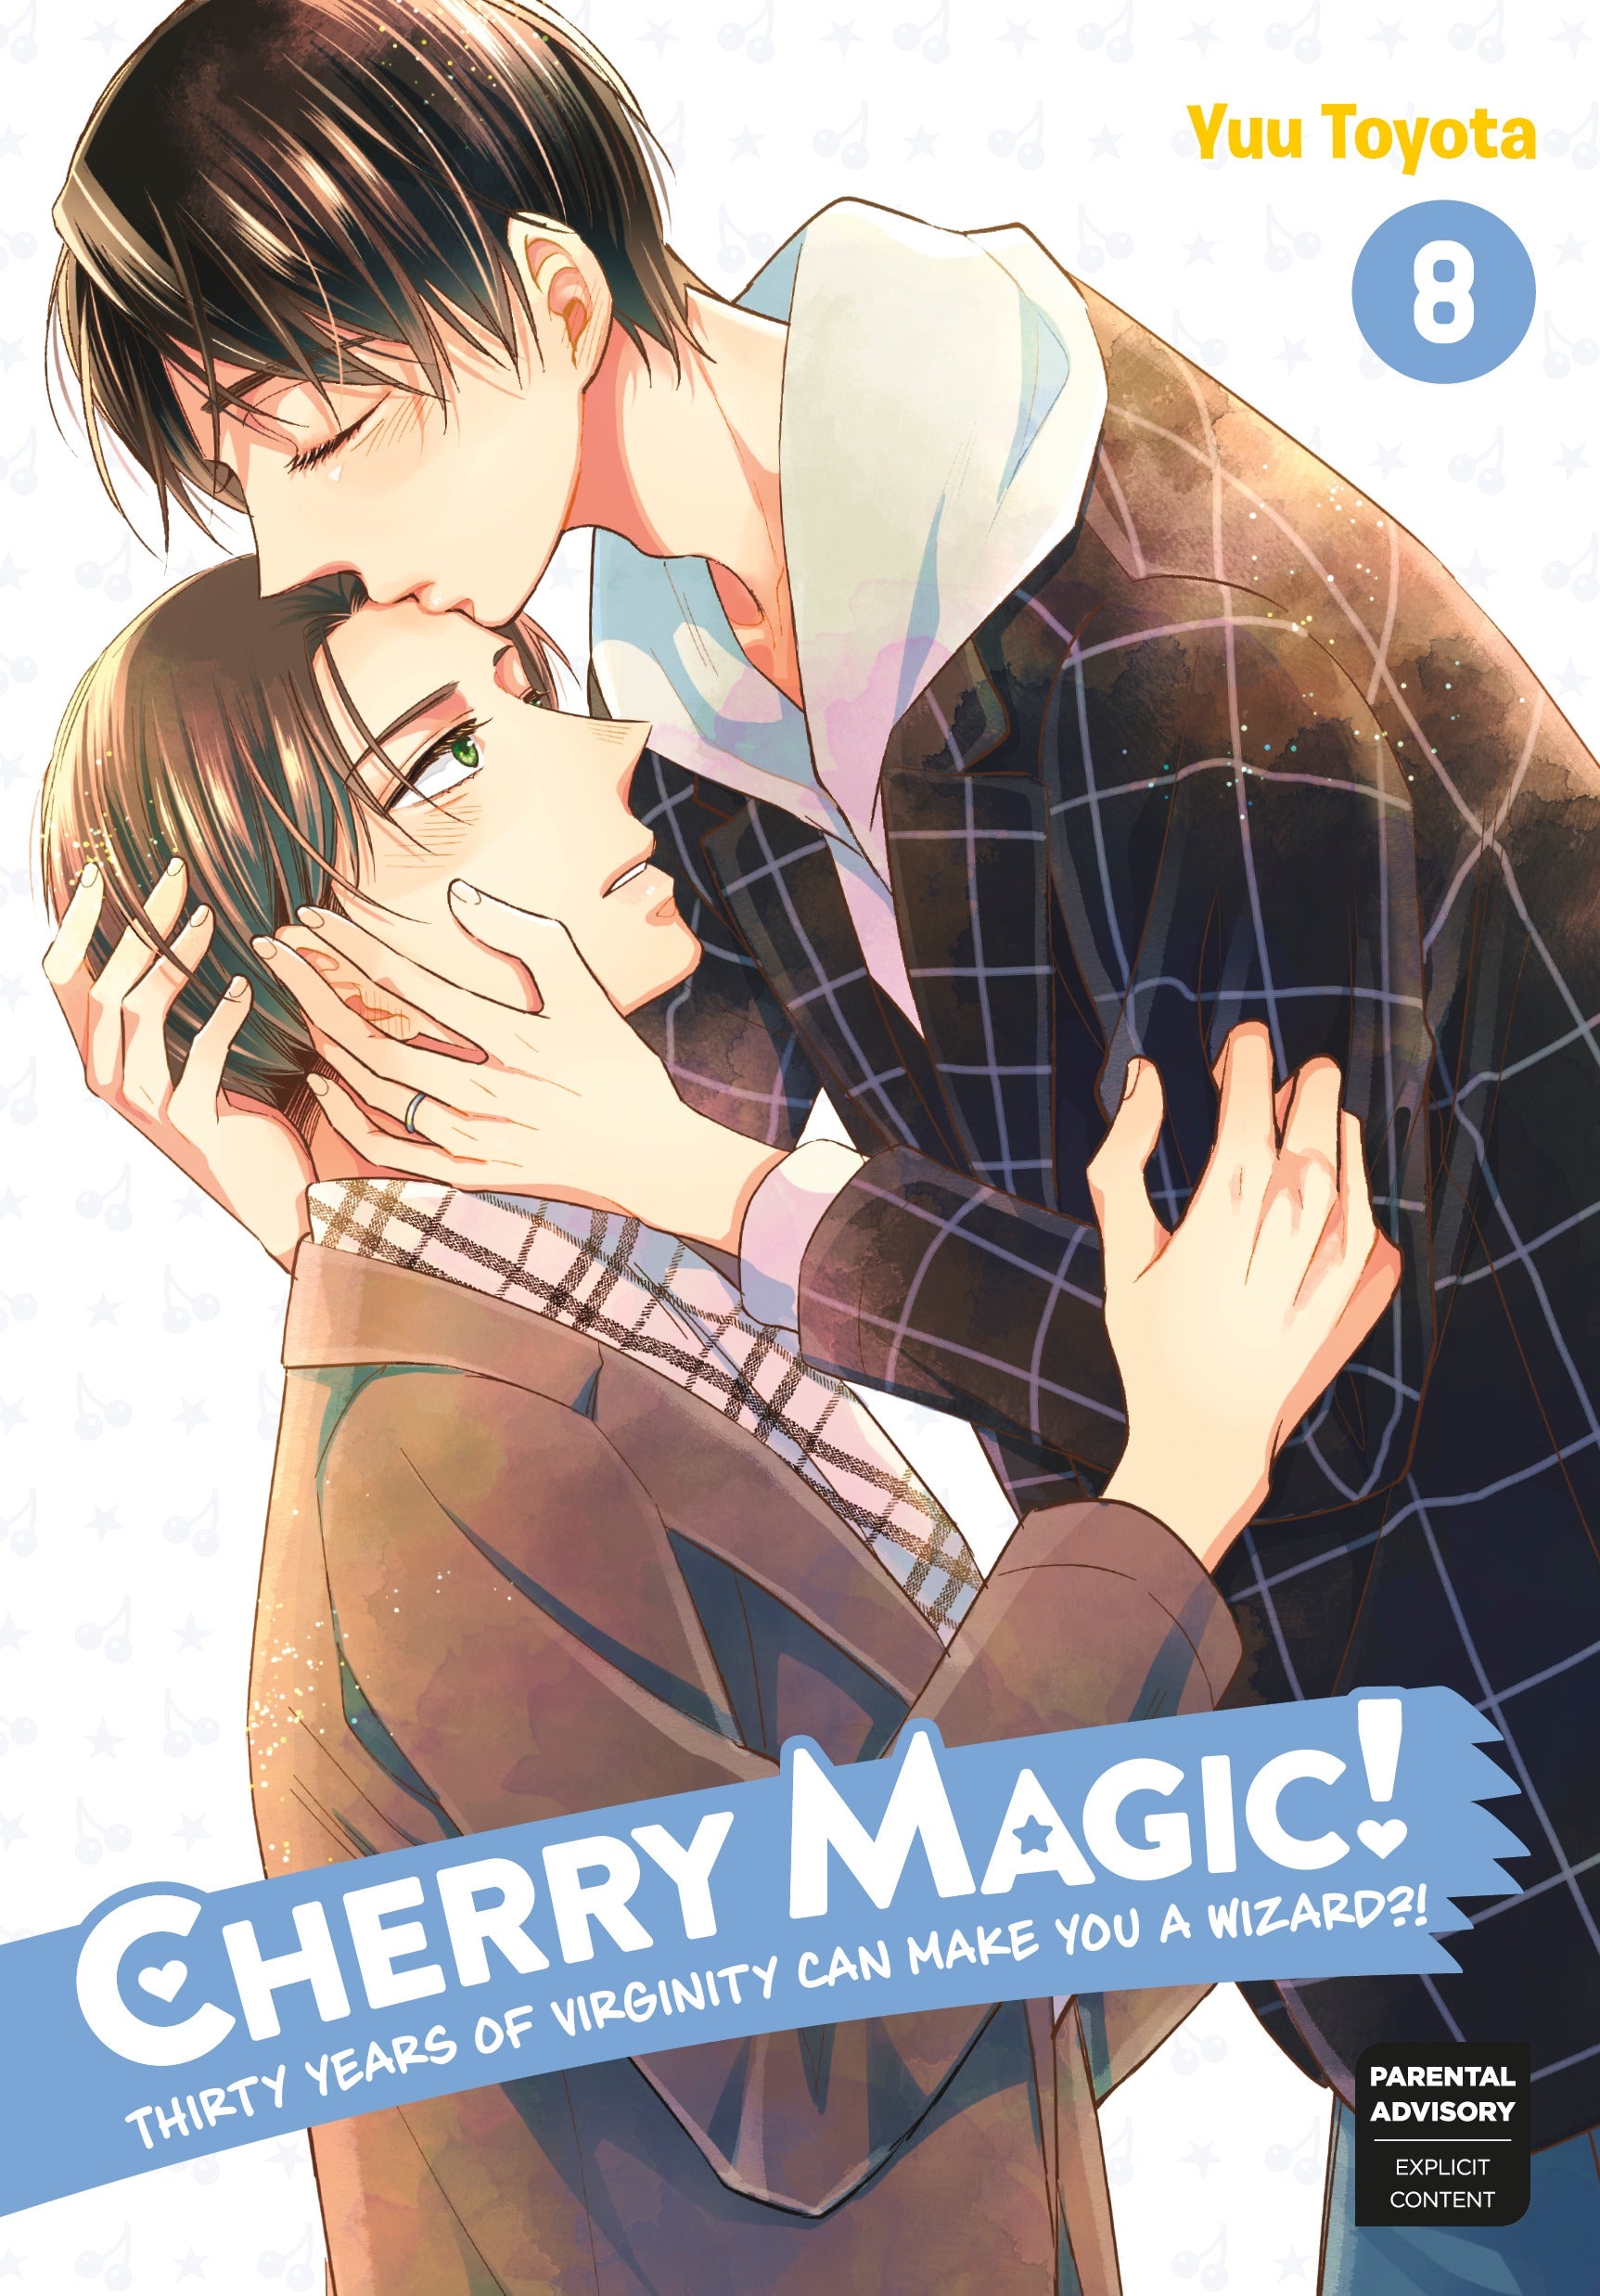 Cherry Magic! Thirty Years of Virginity Can Make You a Wizard?! Vol. 8